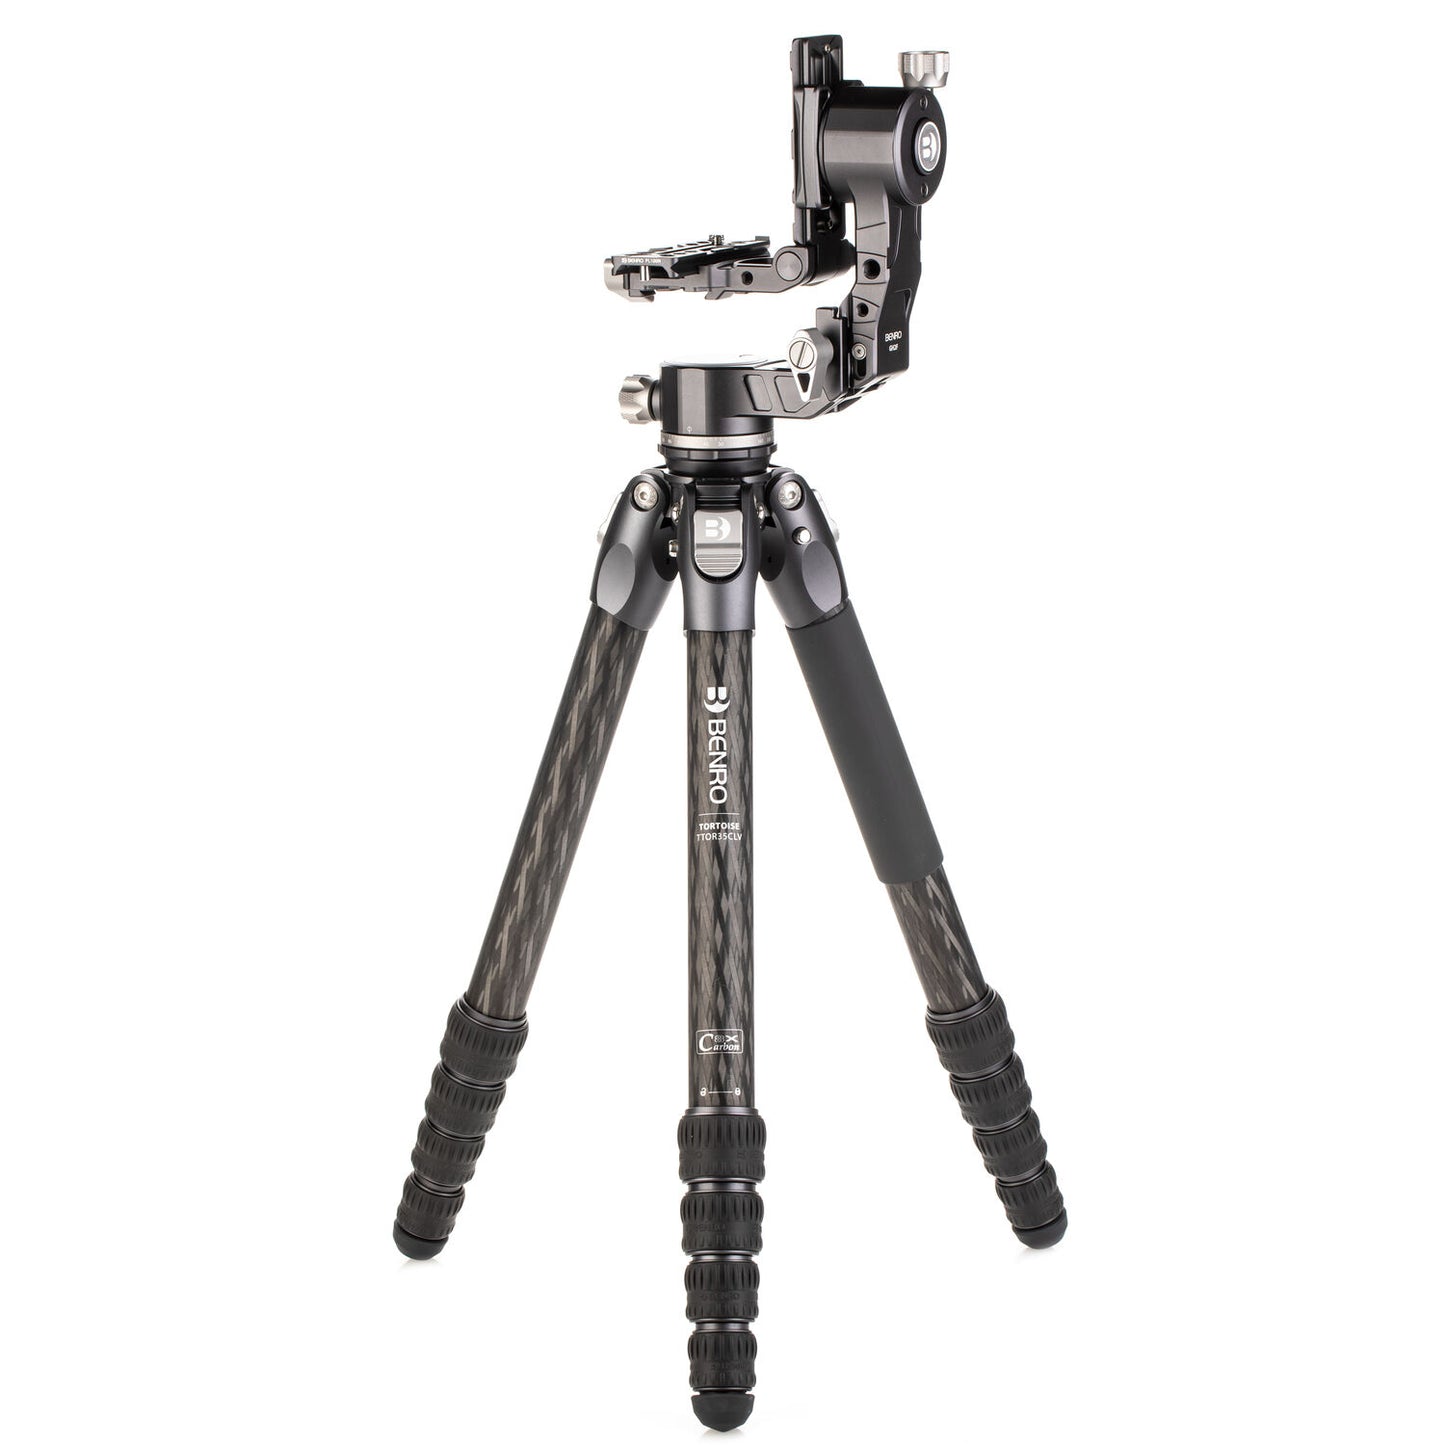 Benro TTOR35CLVGH2F Carbon Fiber Tripod Lightweight with GH2F Folding Gimbal Head and 10kg Load Capacity